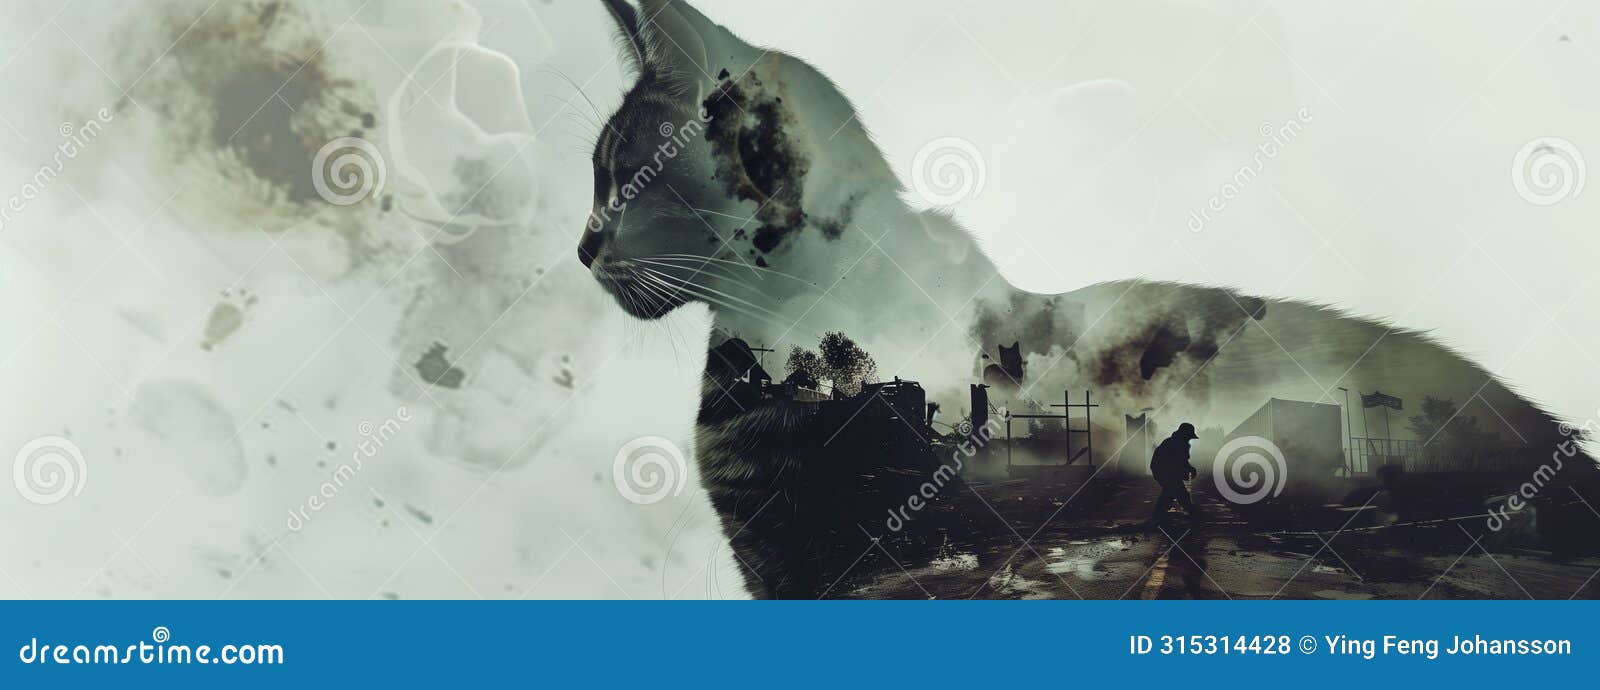 double exposure of a cat and a war zone, blending the feline grace with the chaos of conflict